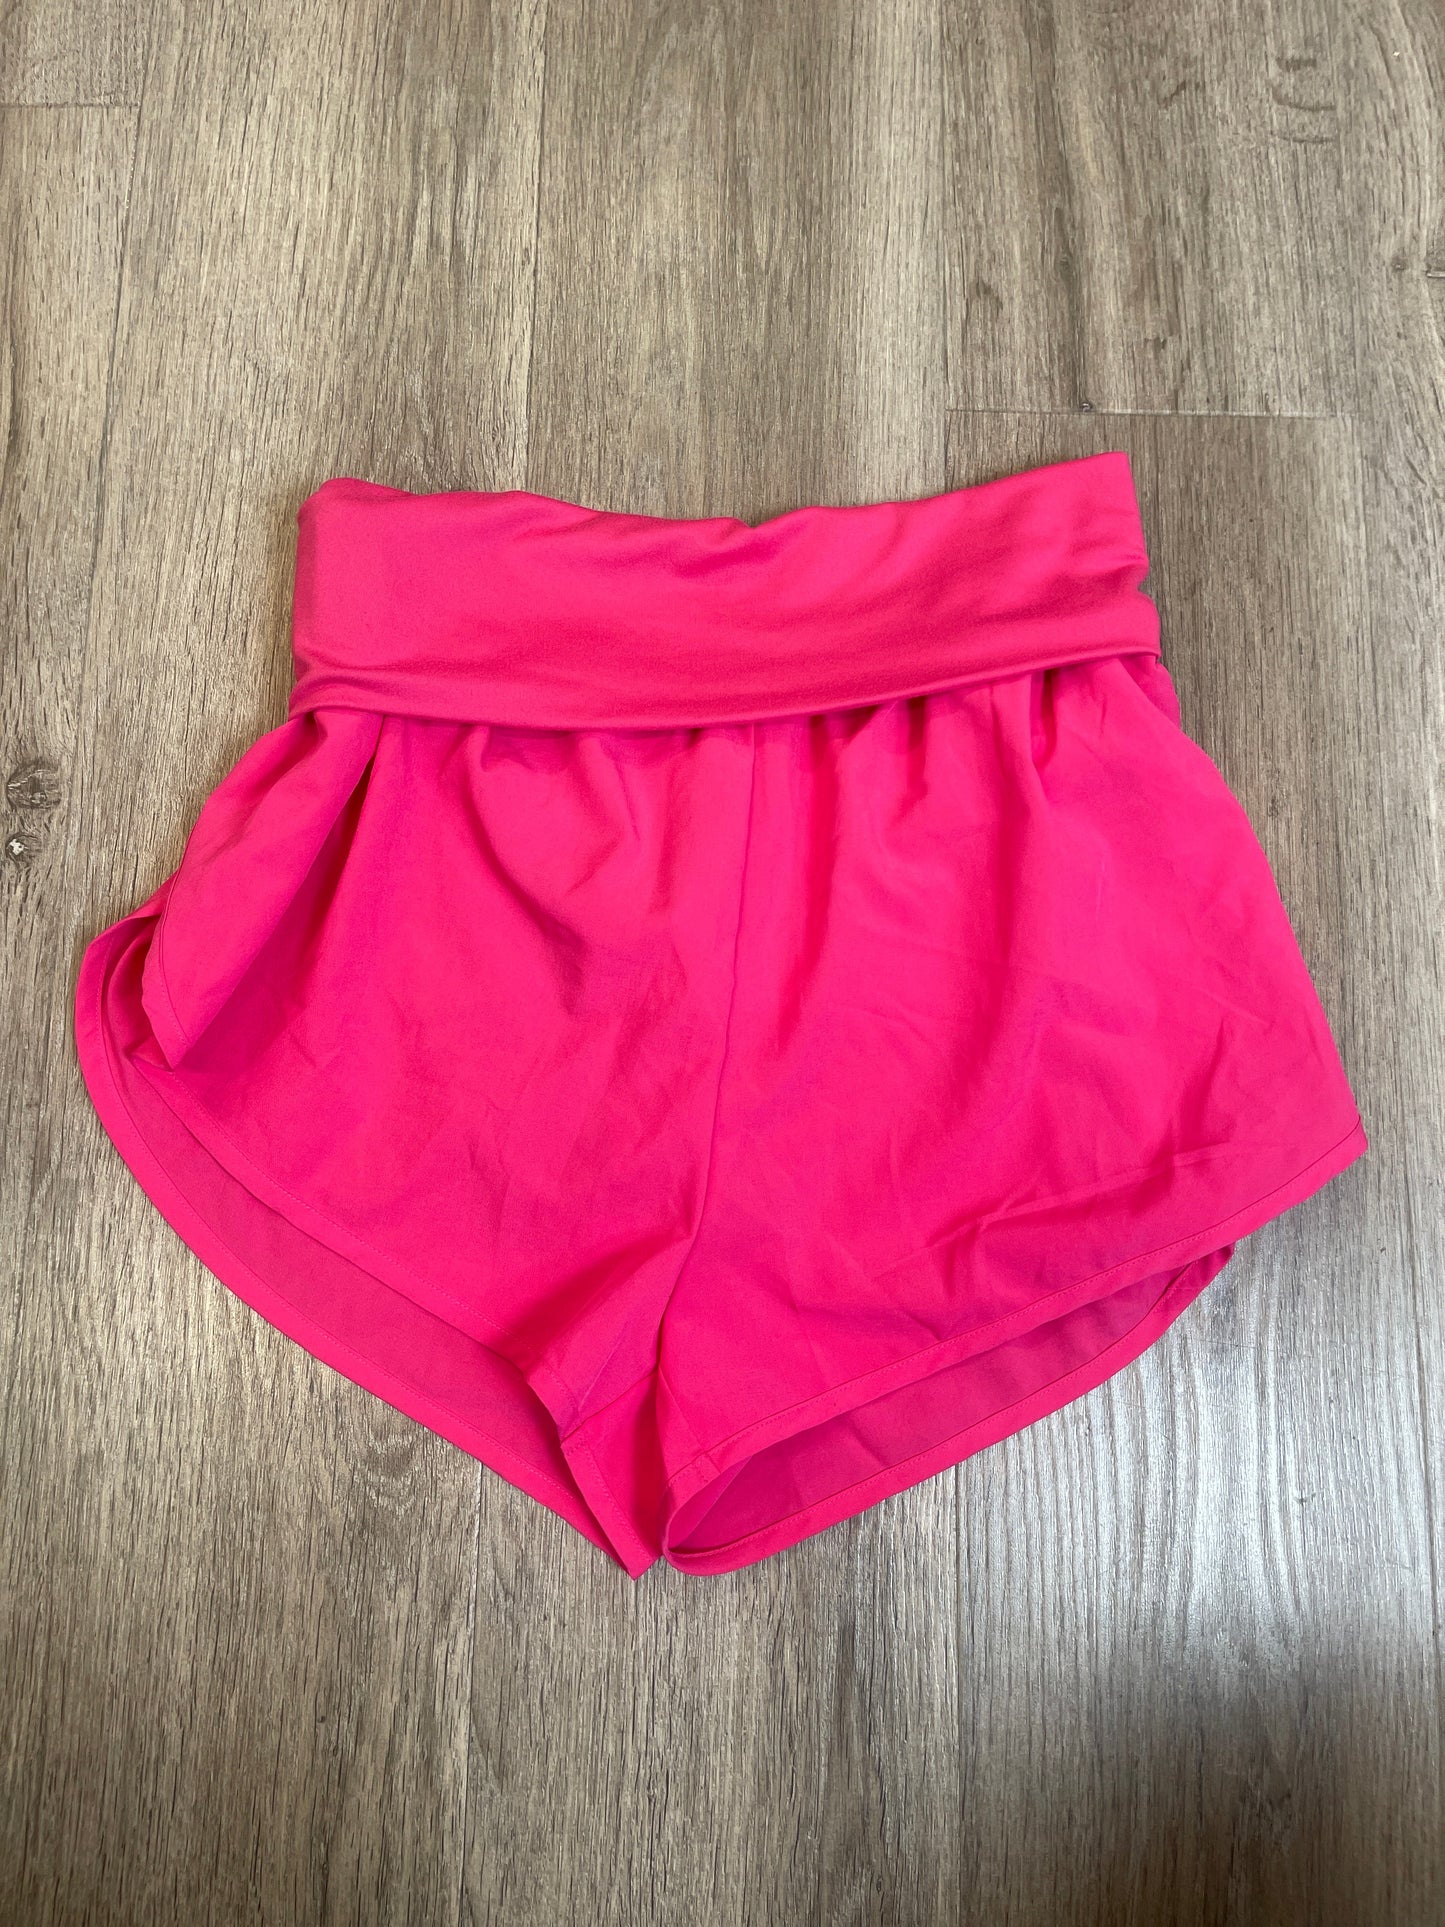 Shorts By Zenana Outfitters  Size: L